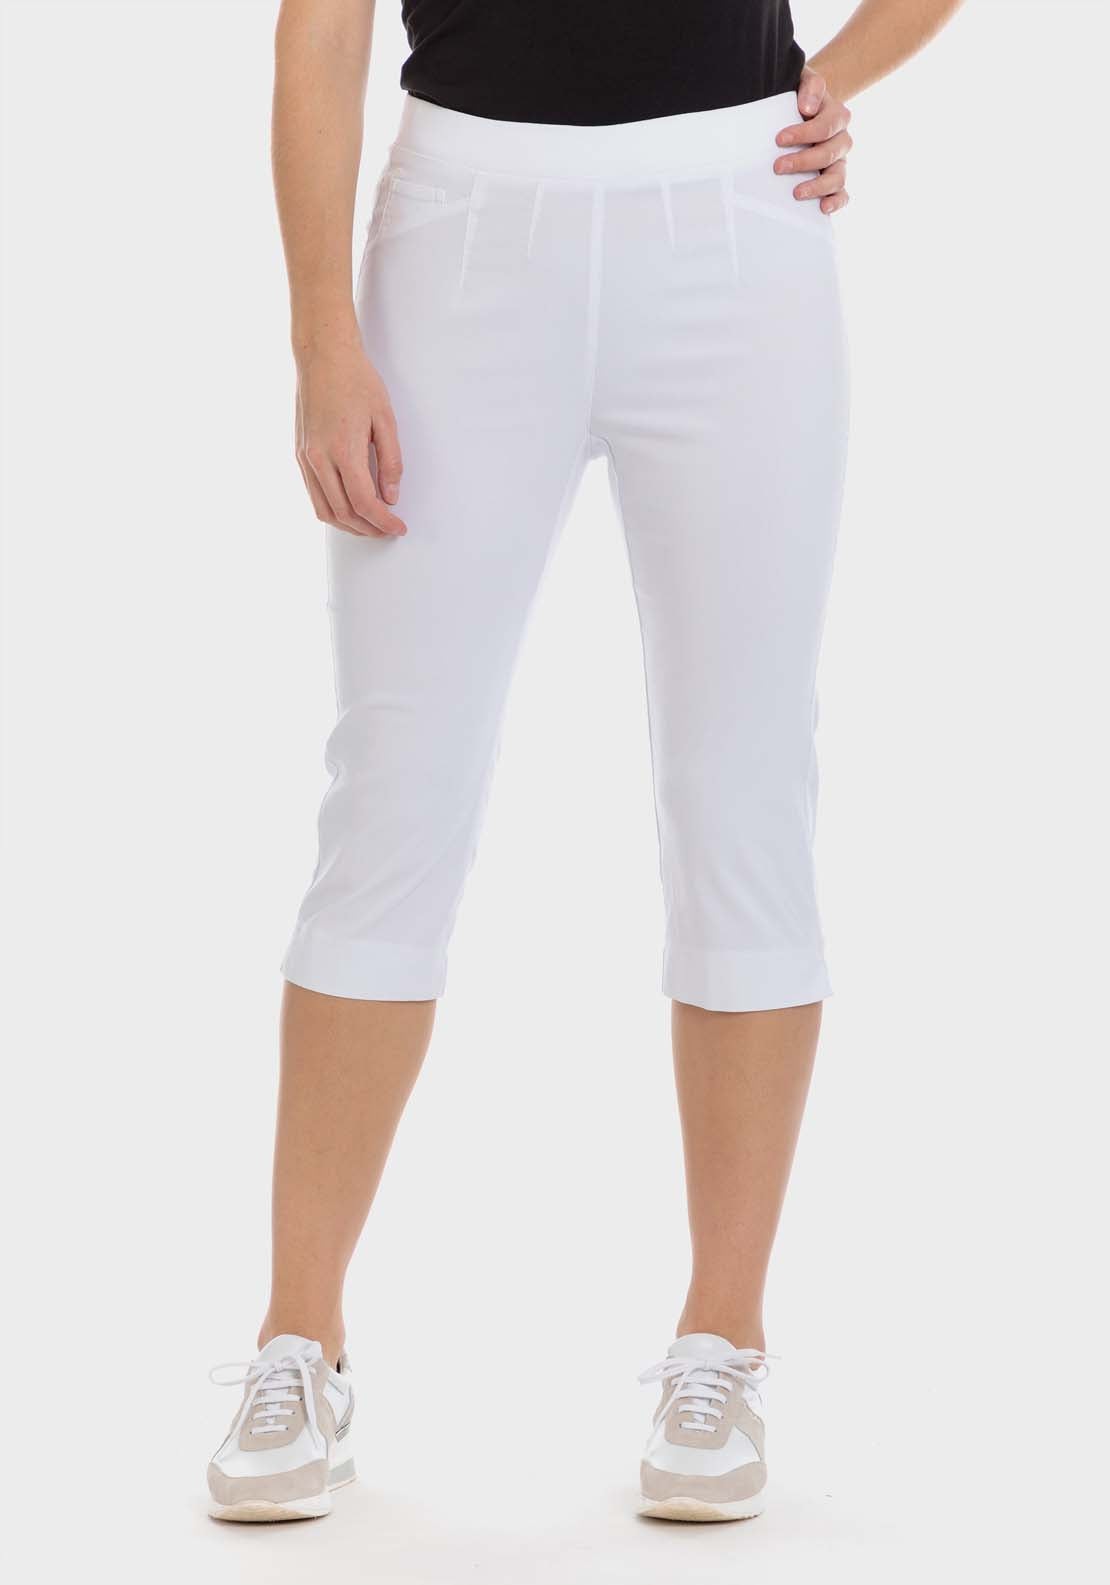 Punt Roma Bengaline Crop Trousers - White 1 Shaws Department Stores